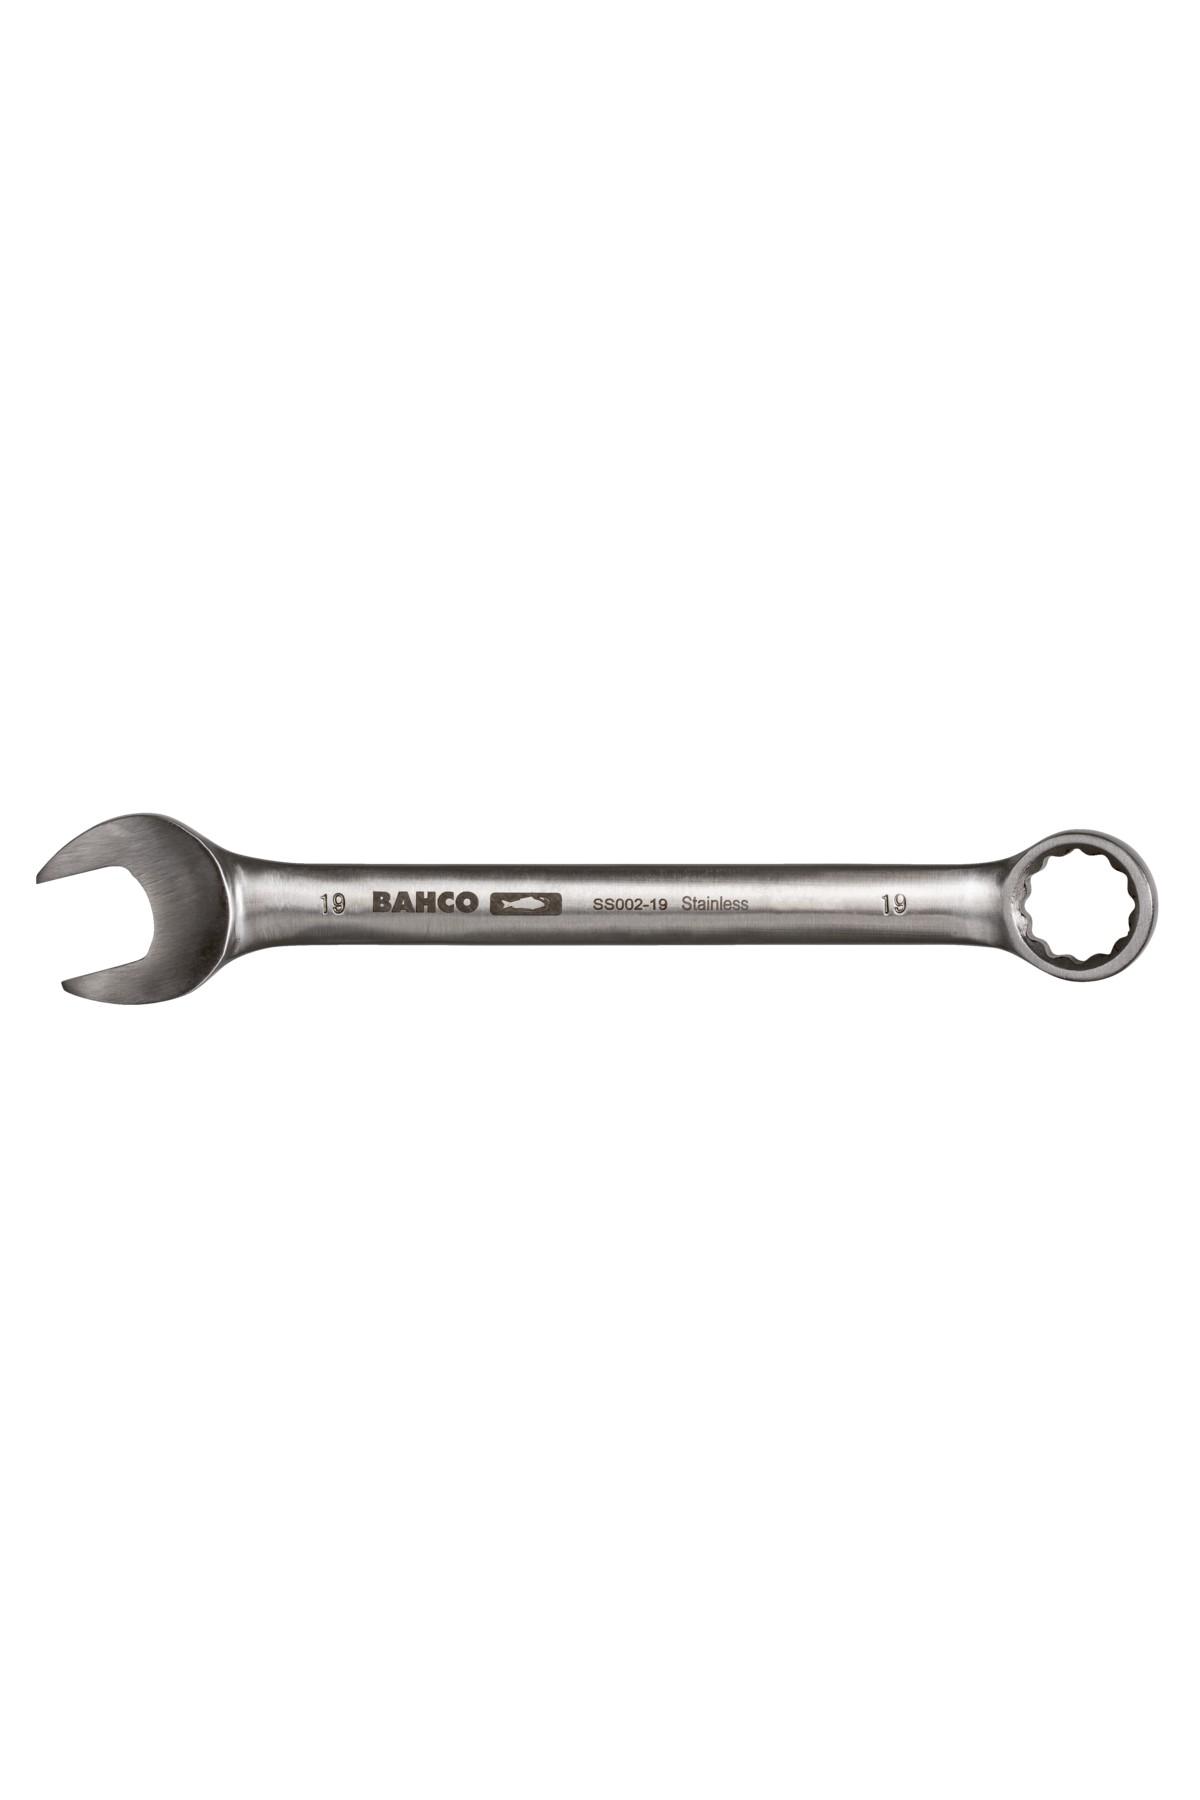 Ring spanner stainless steel SS003 11/32